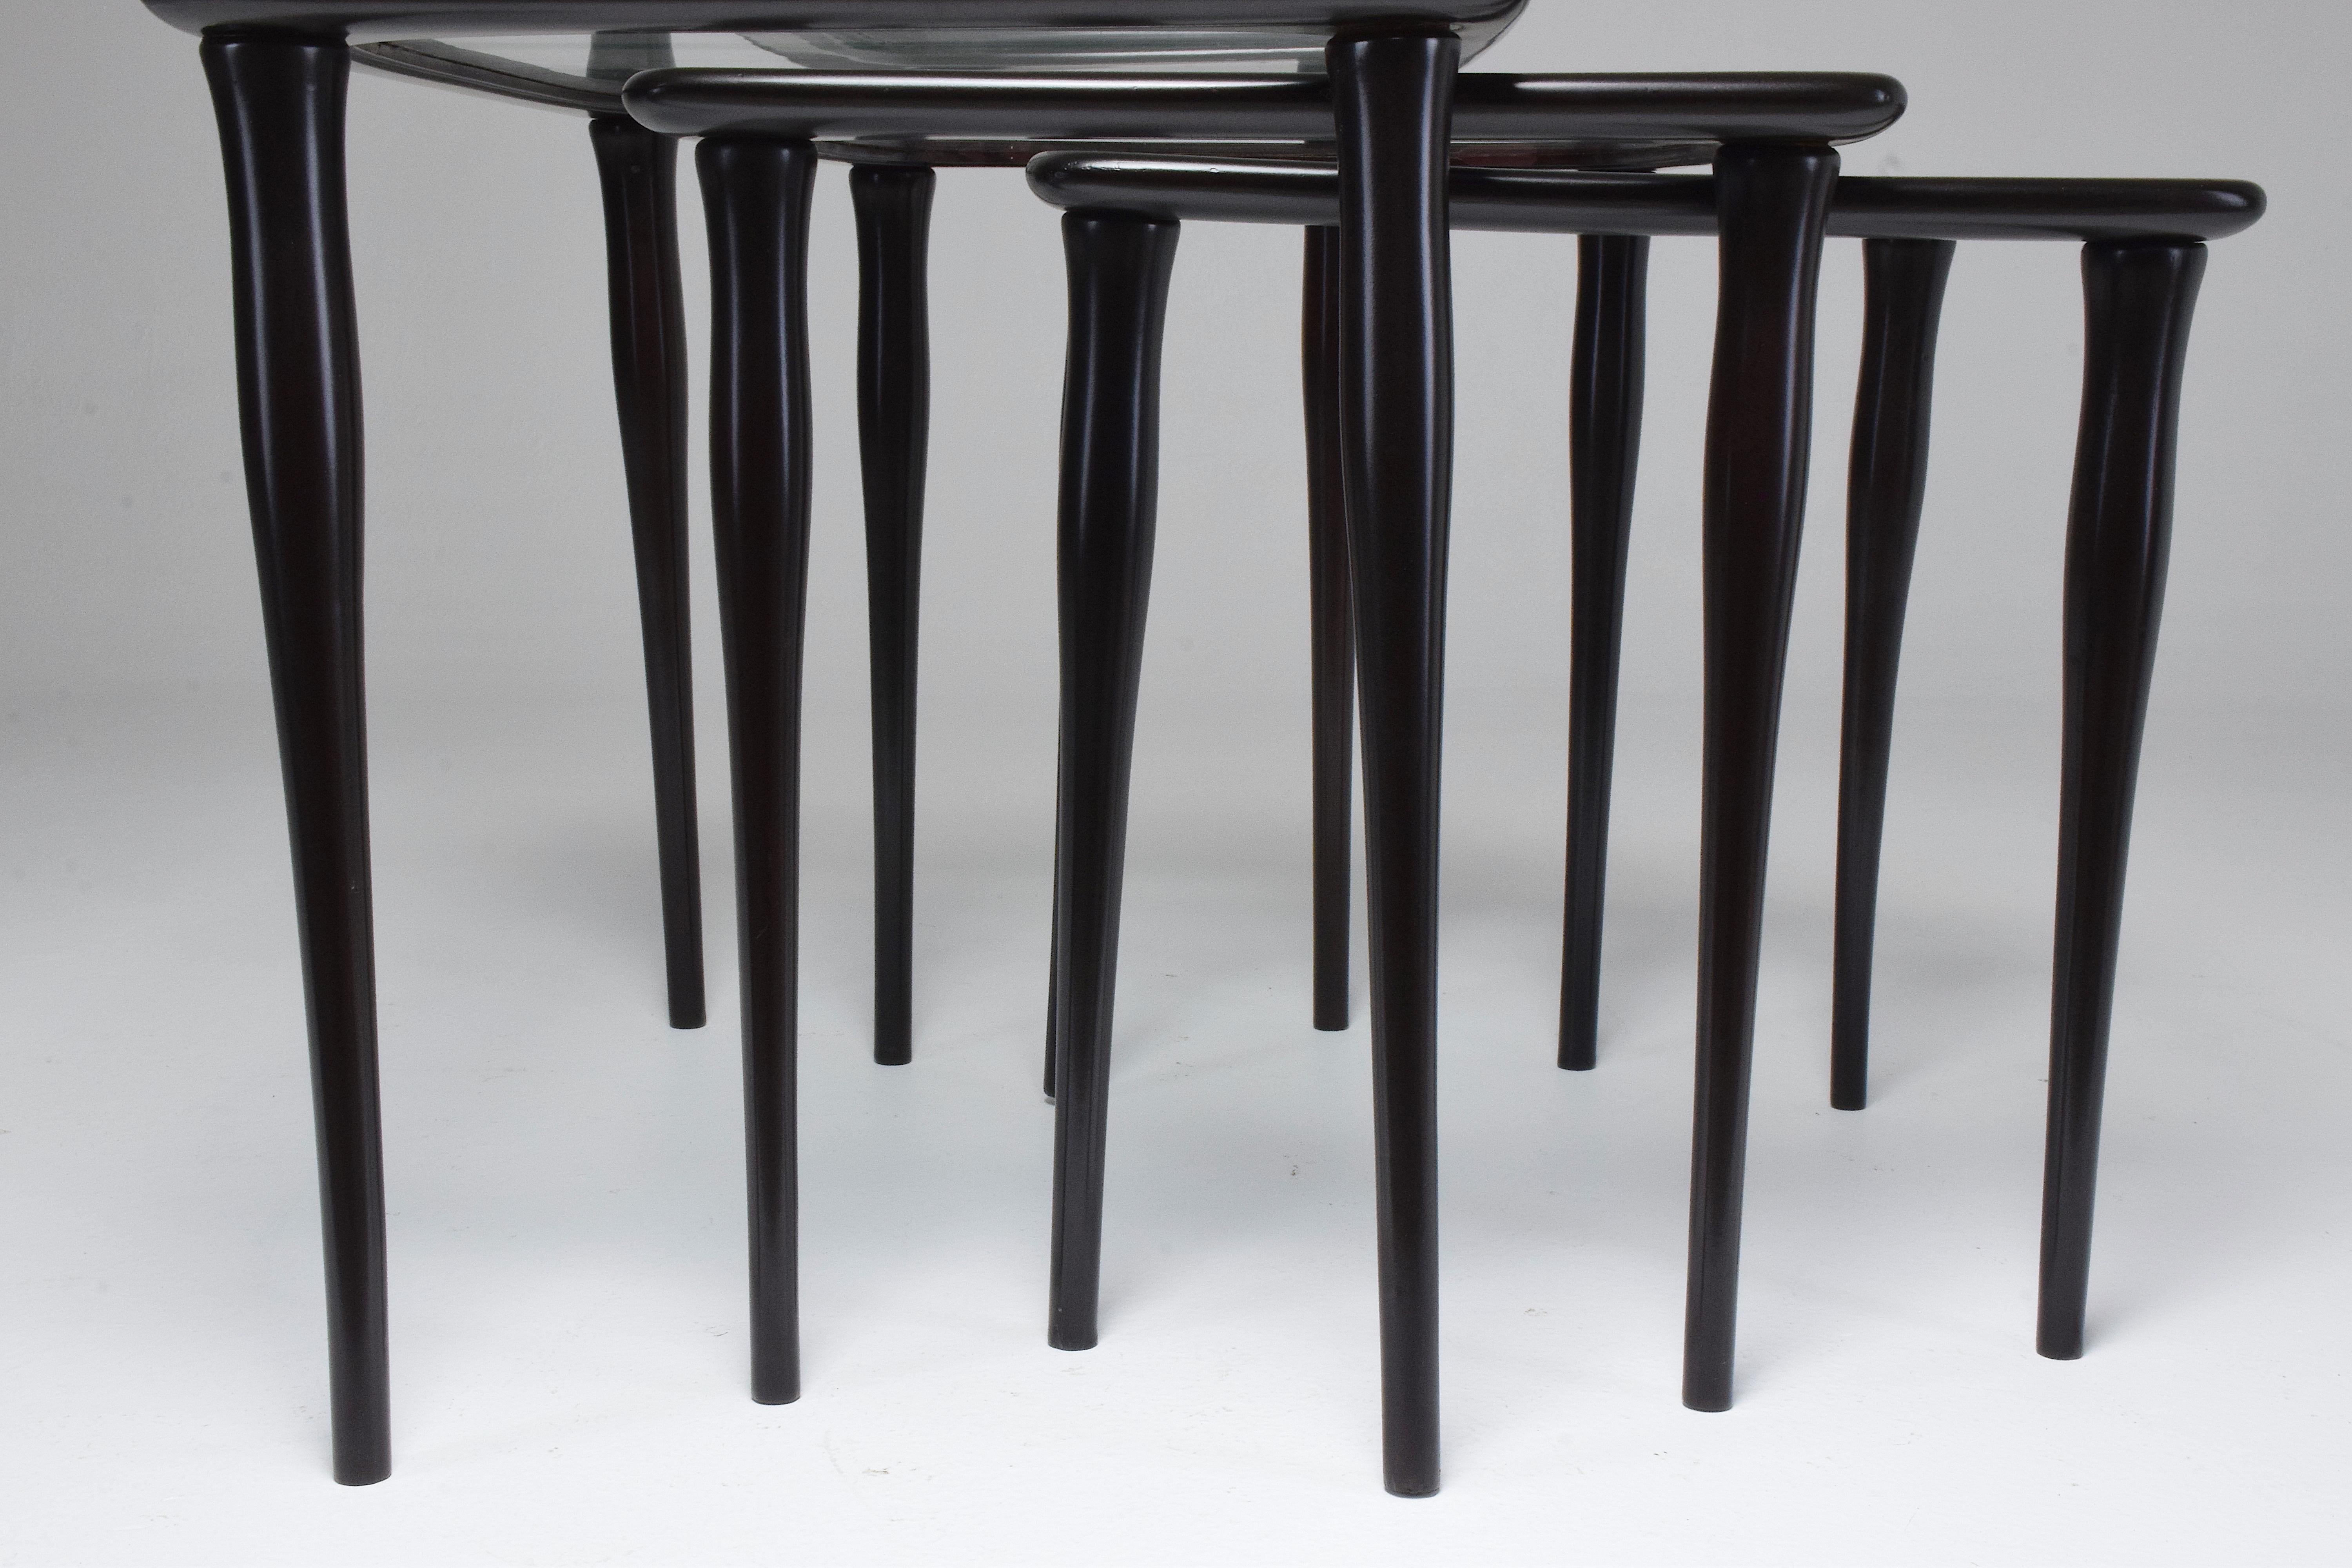 Three Italian Midcentury Nesting Tables by Ico Parisi, 1950s For Sale 4